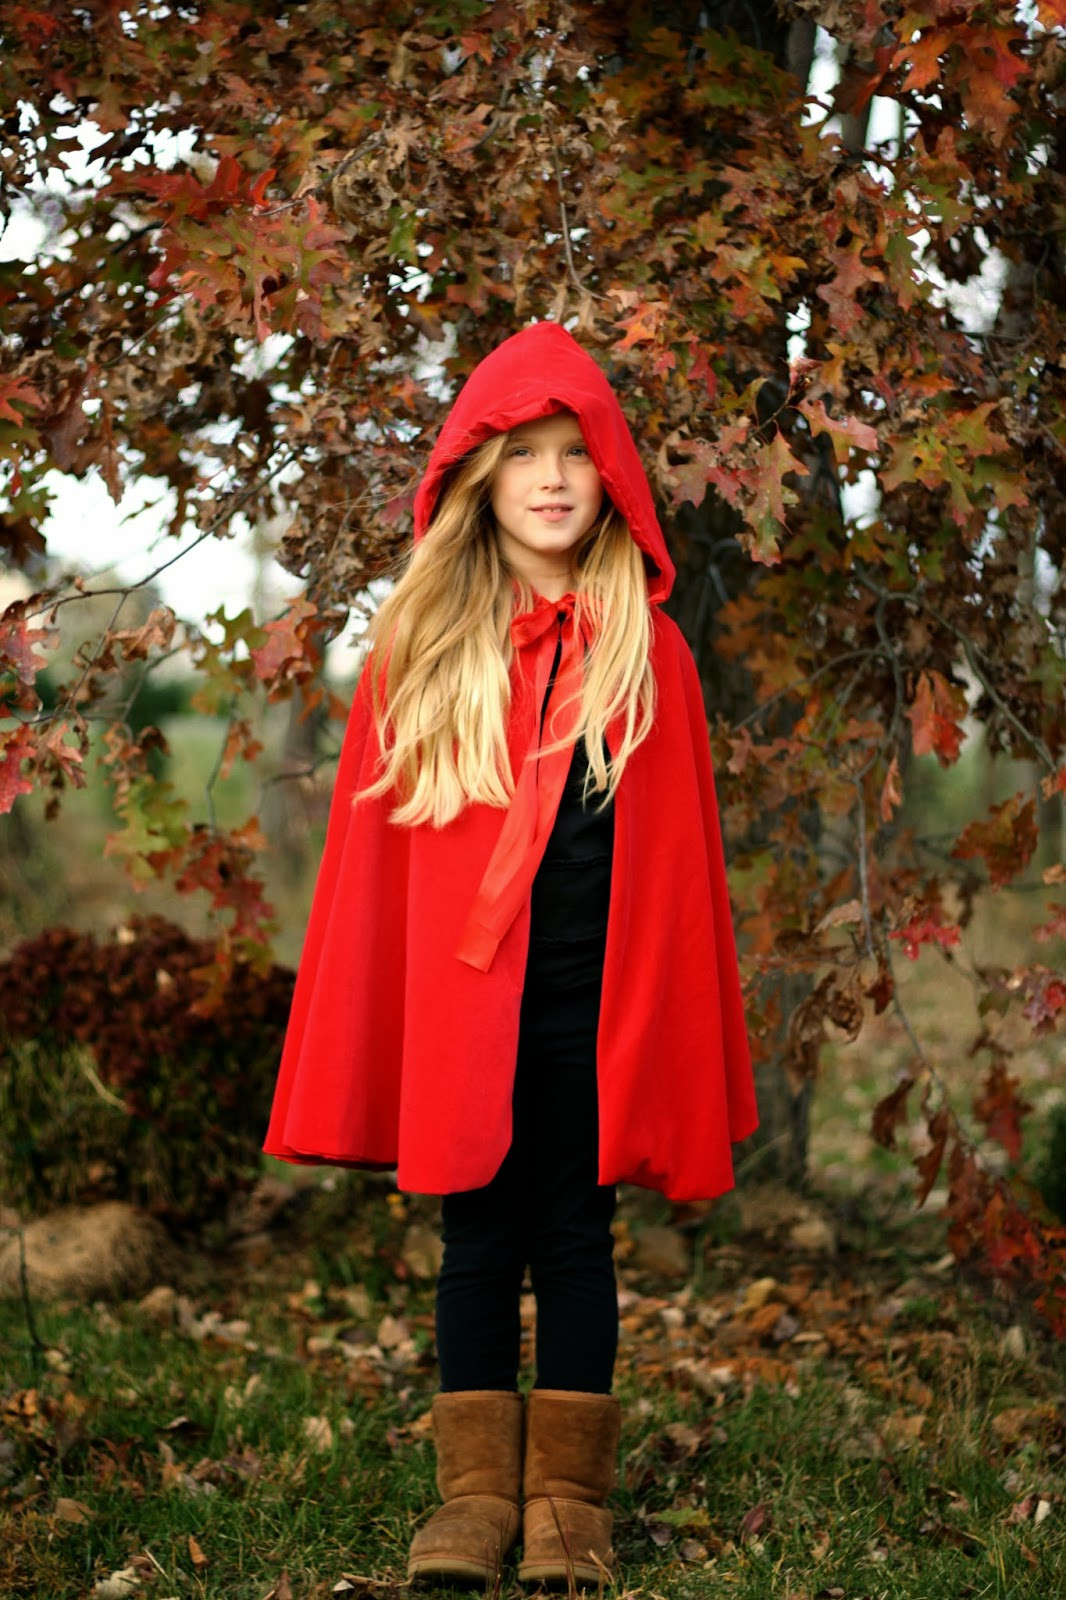 Red Riding Hood Costume DIY
 Keeping My Cents ¢¢¢ Bumble Bee & Little Red Riding Hood